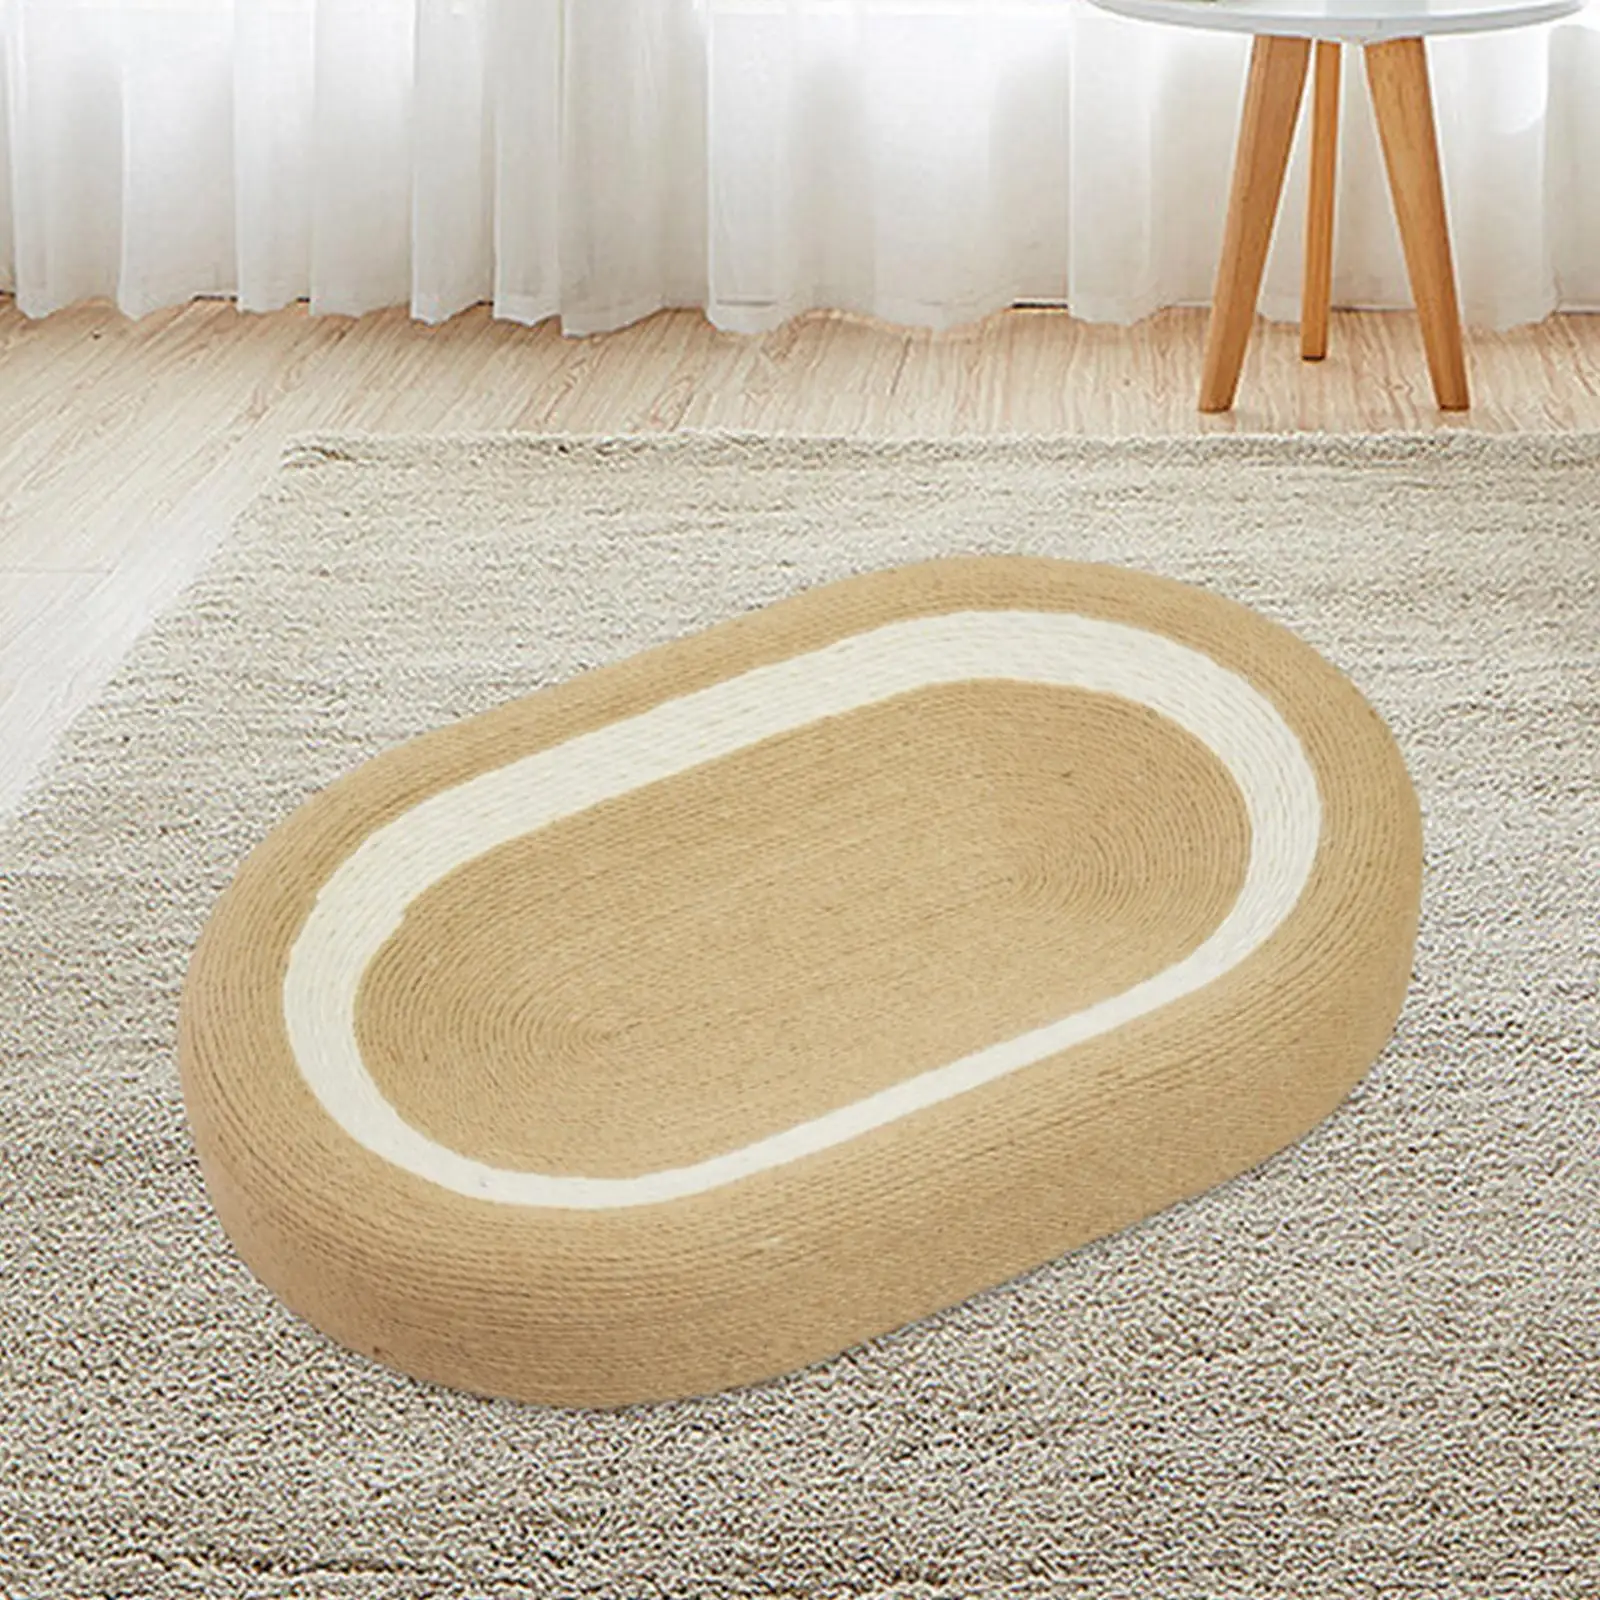 Cat Scratching Pad Small Medium Large Cats for Sofa Furniture Protector Kitten 61x41cm Cat Scratcher Lounge Bed Oval Pet Cushion